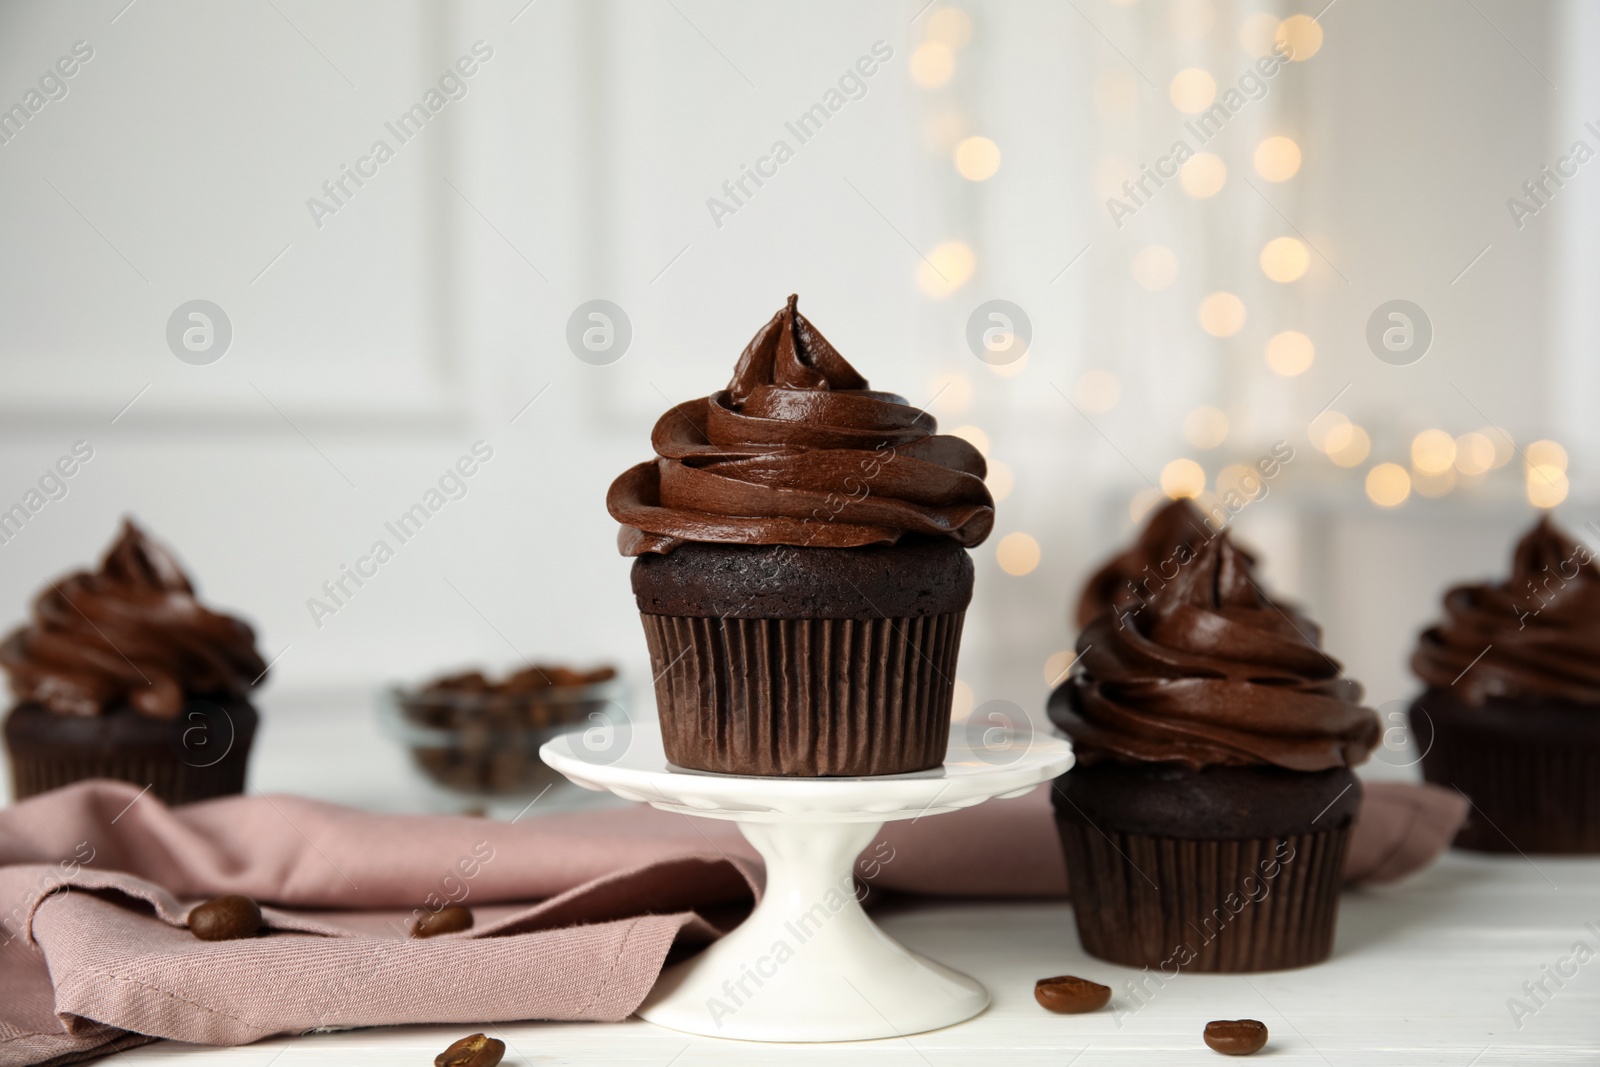 Photo of Delicious chocolate cupcakes with cream on white table against blurred lights